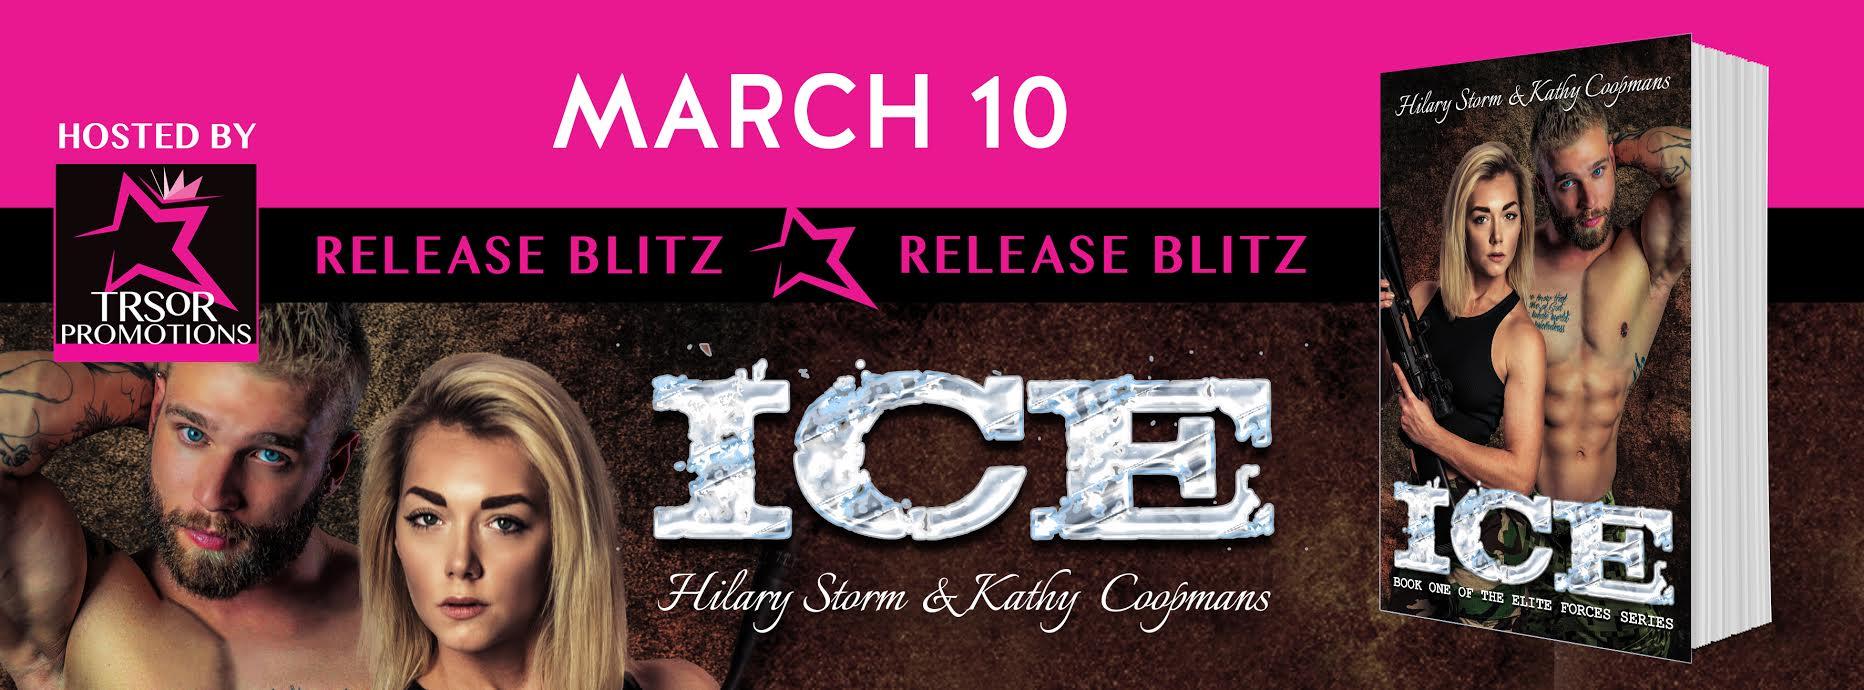 ICE by Hilary Storm & Kathy Coopmans Release Day Blitz and Excerpt